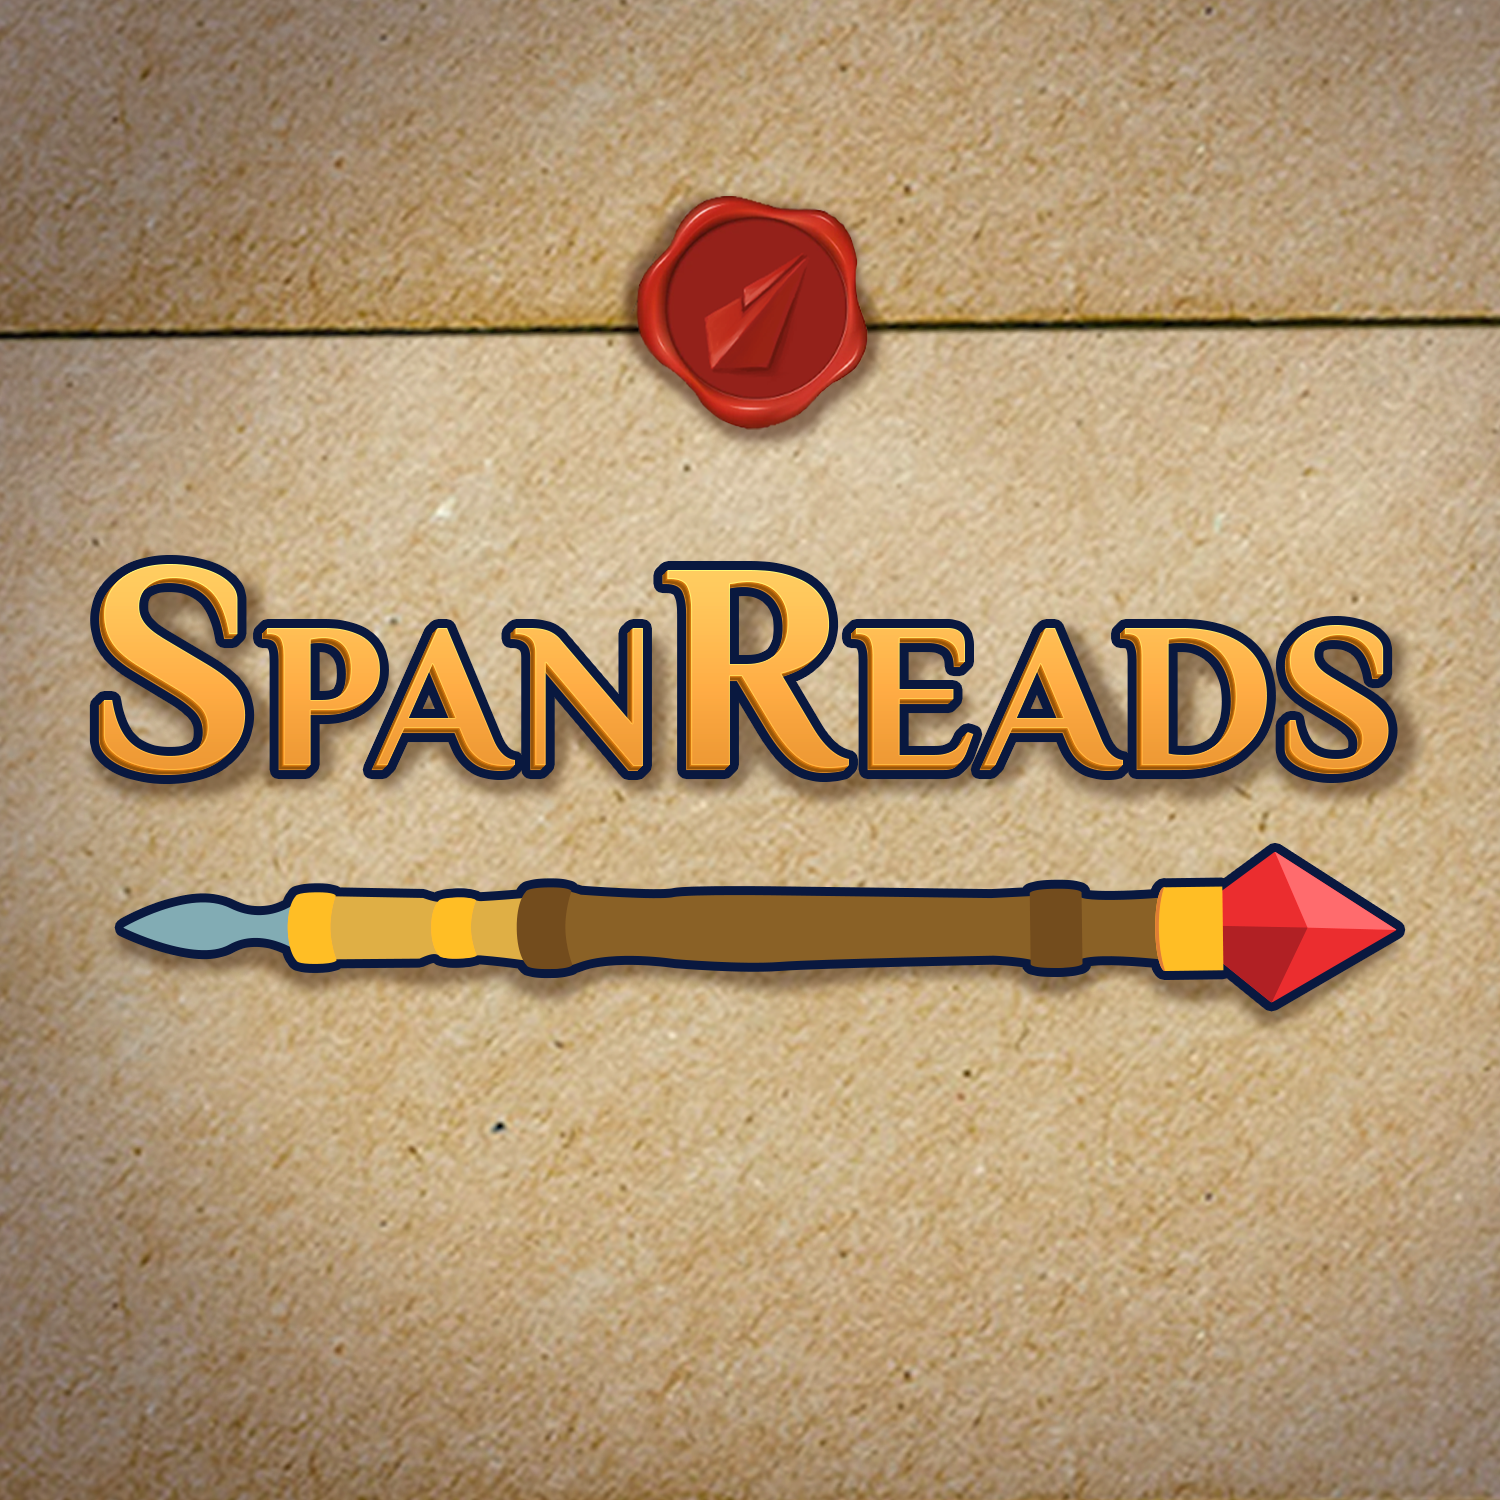 More information about "SpanReads: Cytonic - Lore"